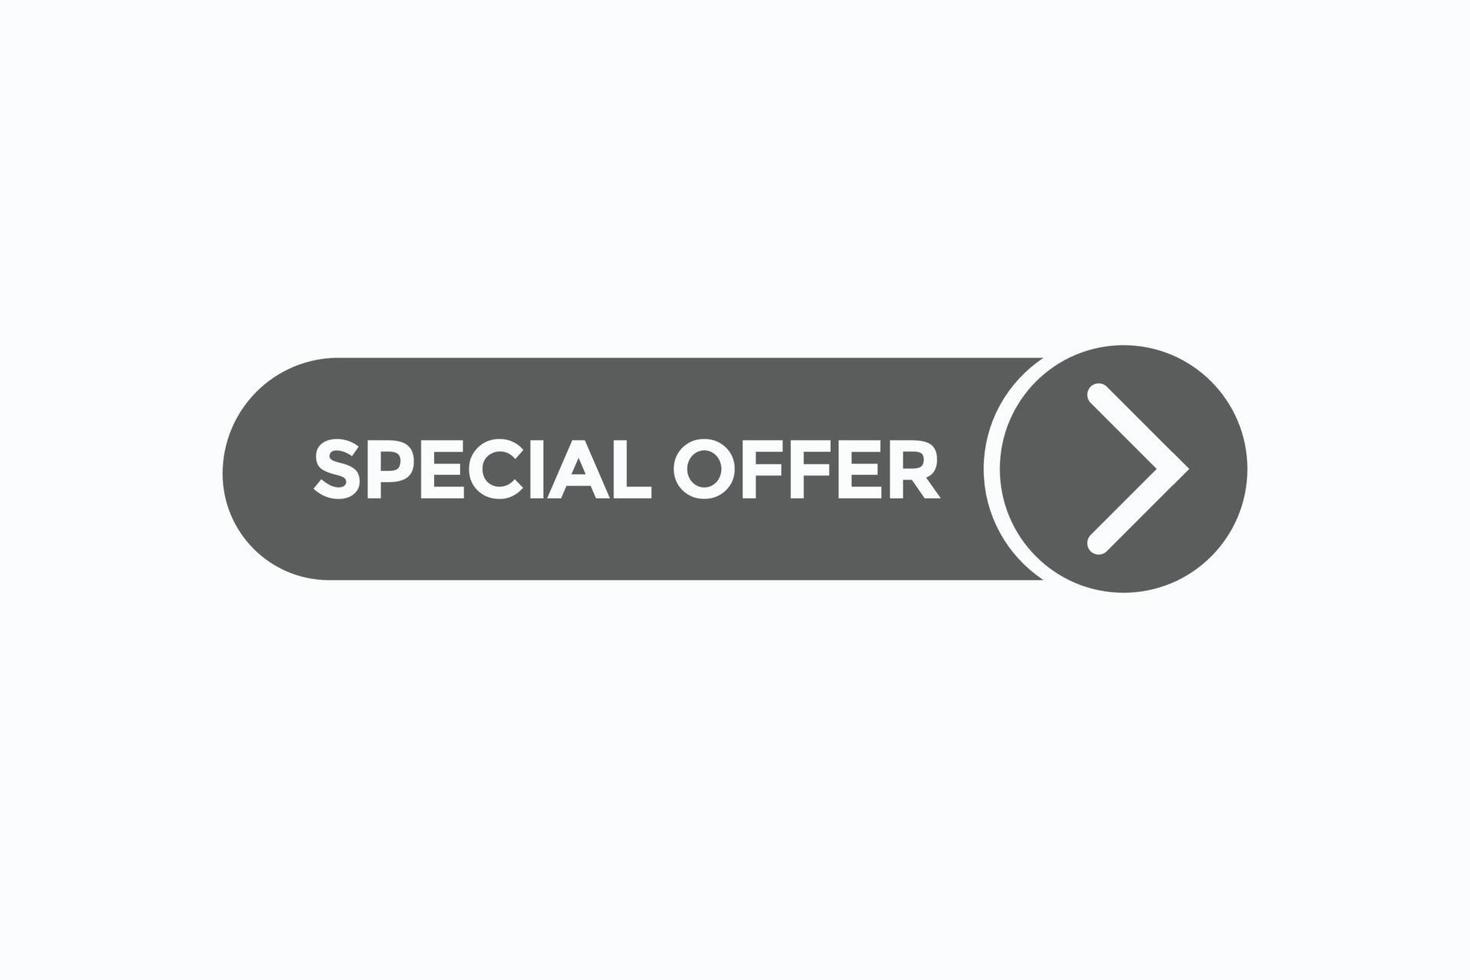 special offer button vectors.sign label speech bubble special offer vector